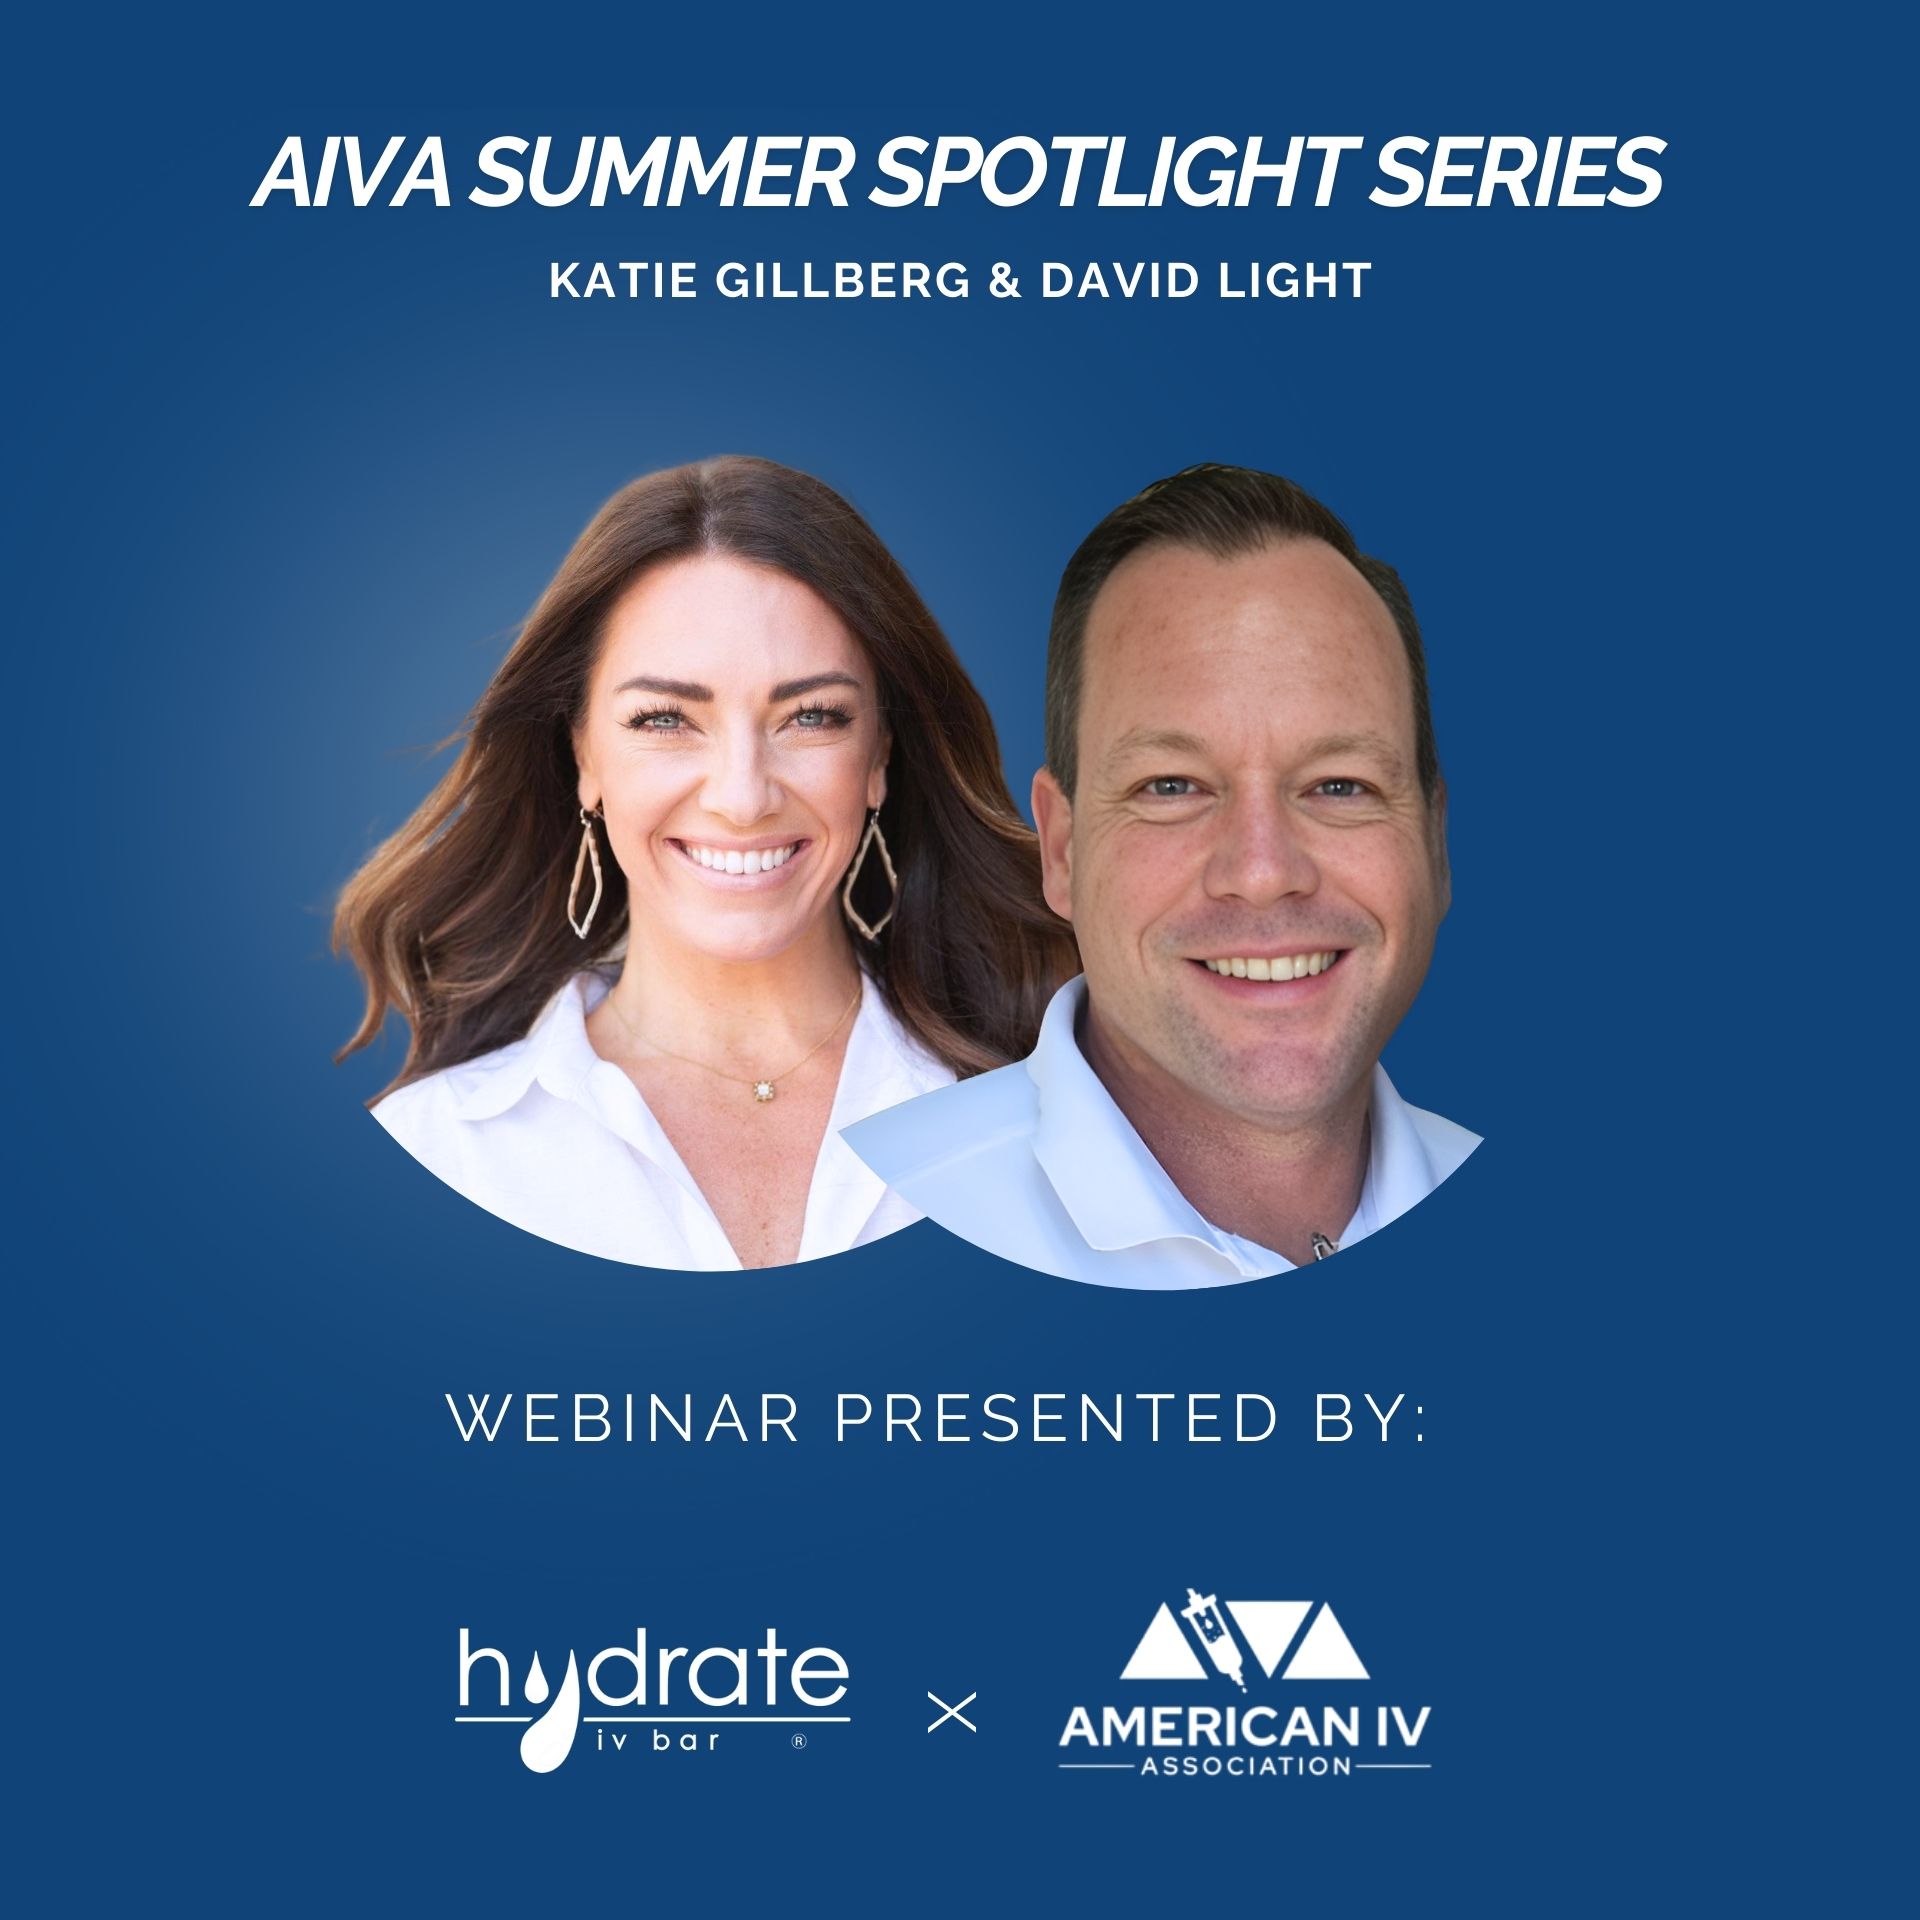 AIVA Summer Series Webinar with Katie Gillberg from Hydrate IV Bar